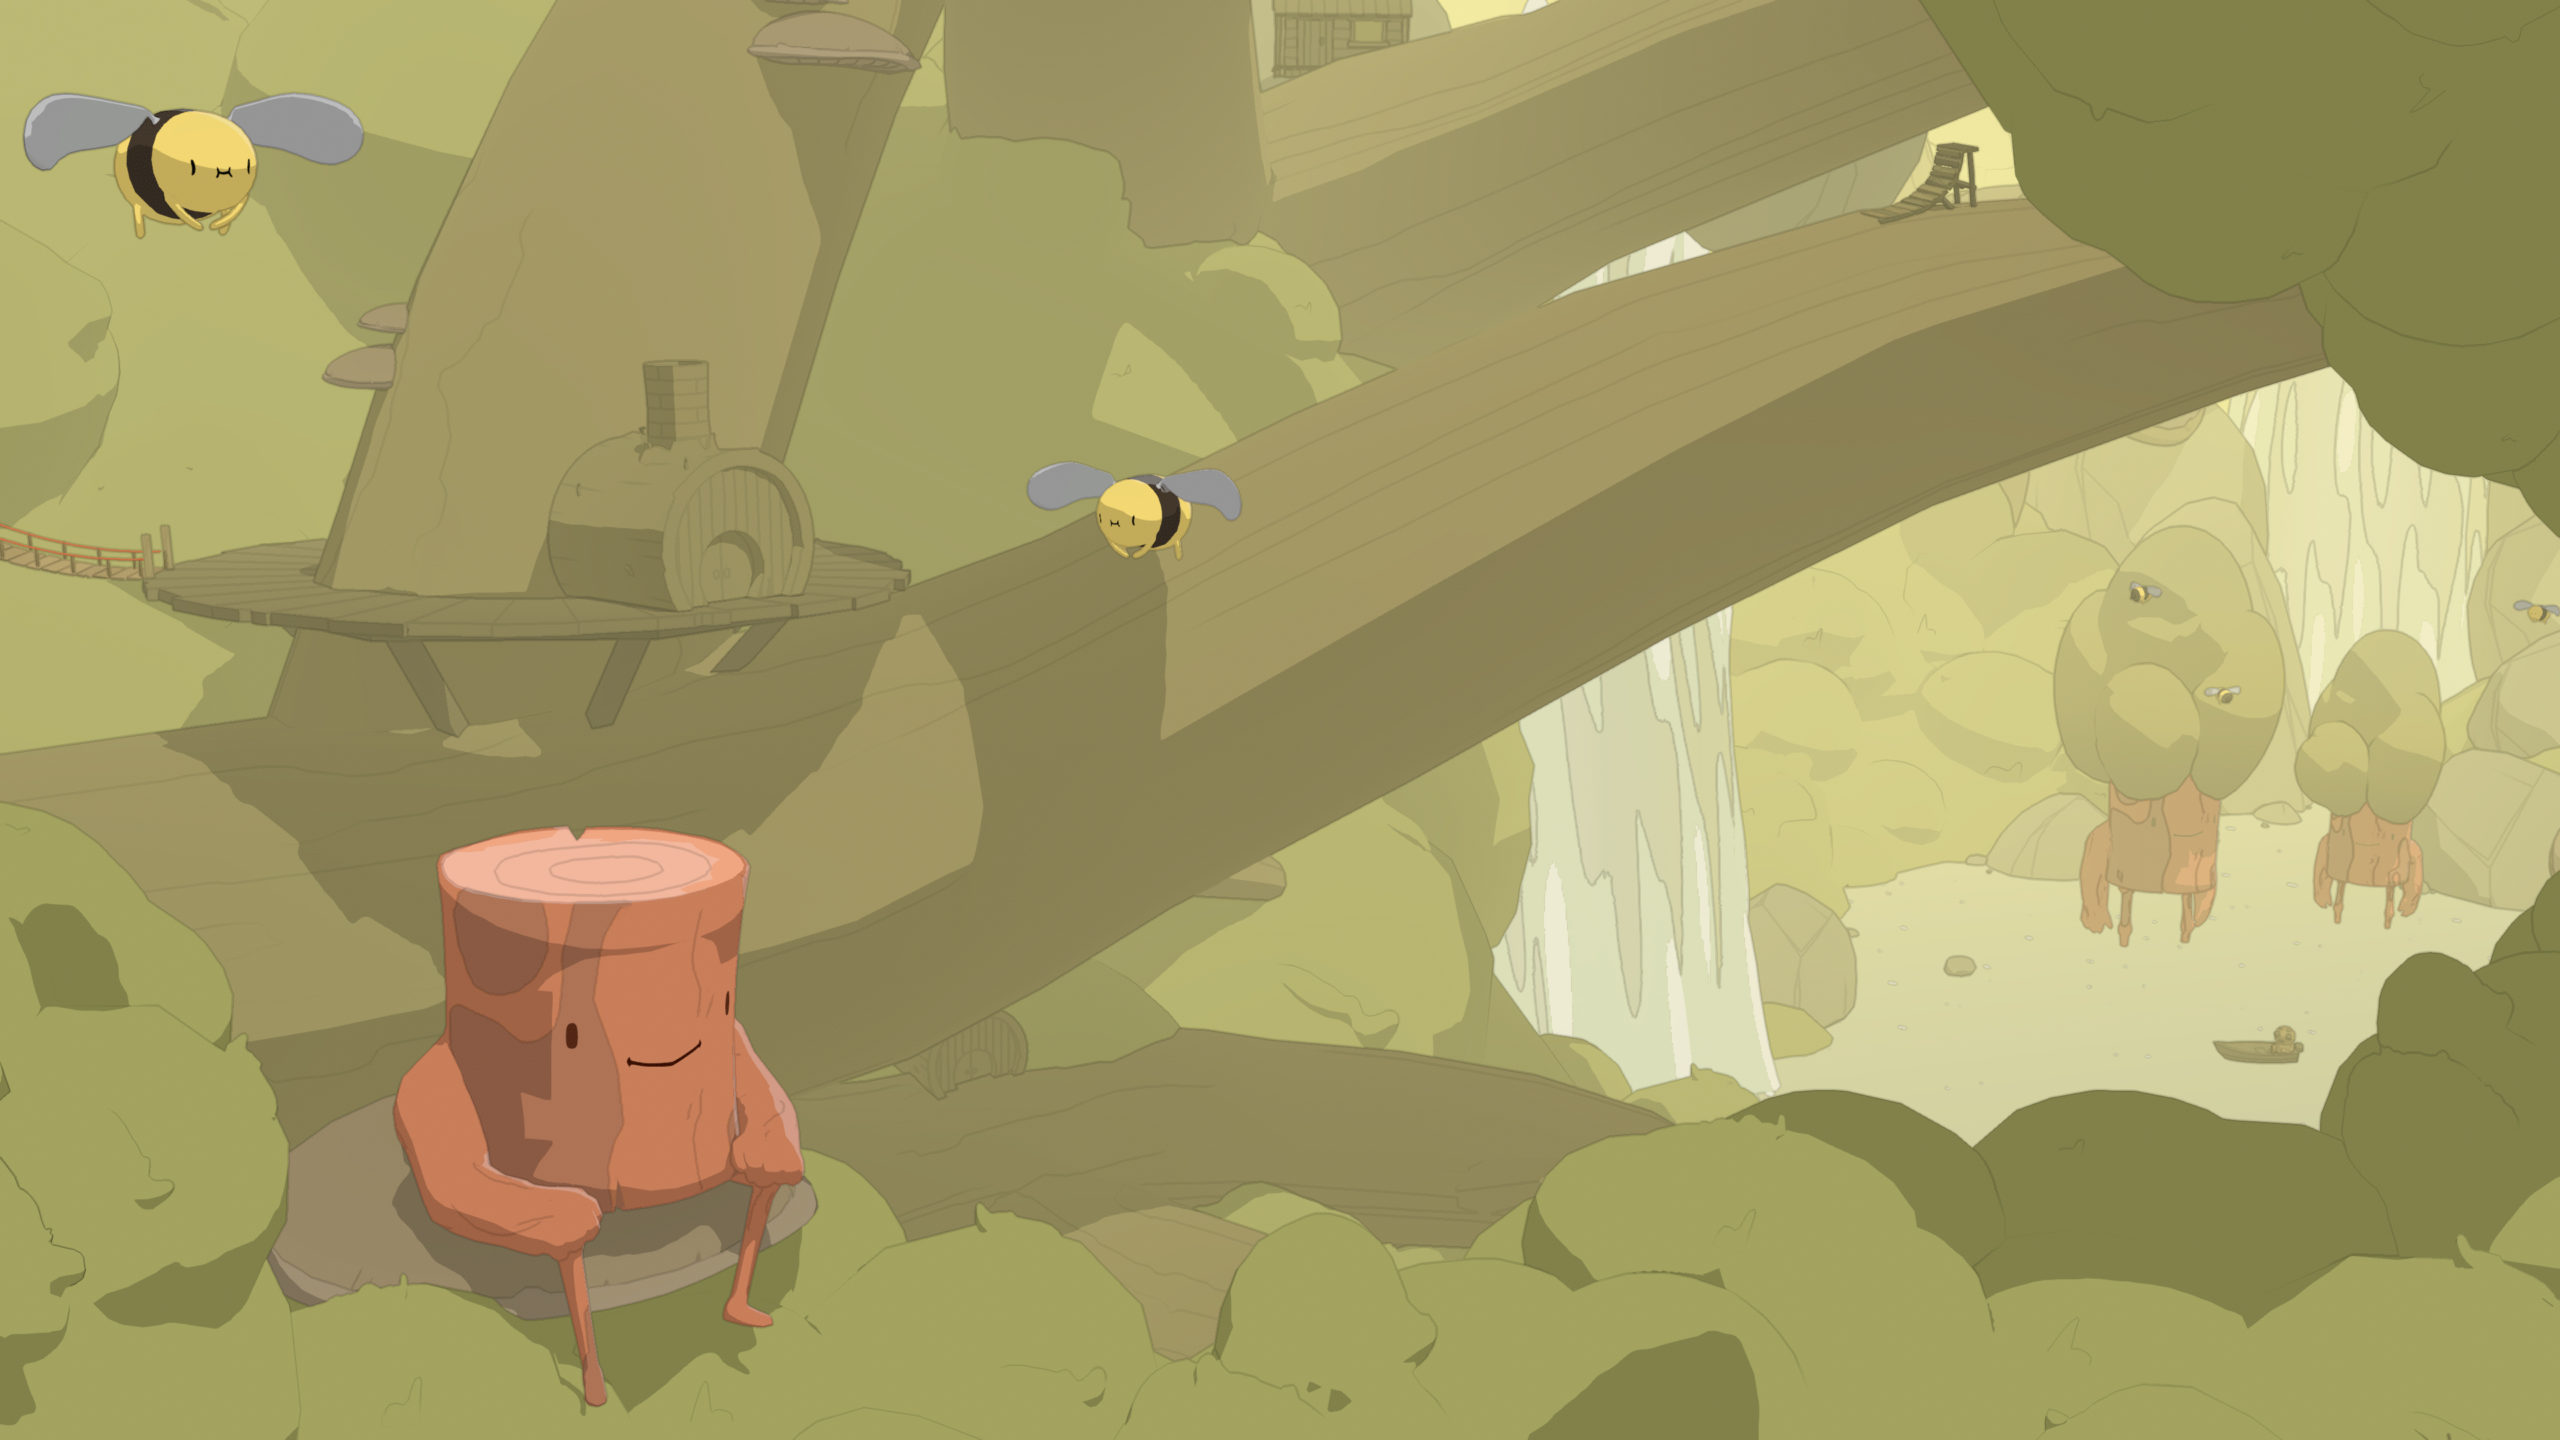 A screenshot of Cloverbrook, the forest biome in OlliOlli World. There are little tree stump people and bees